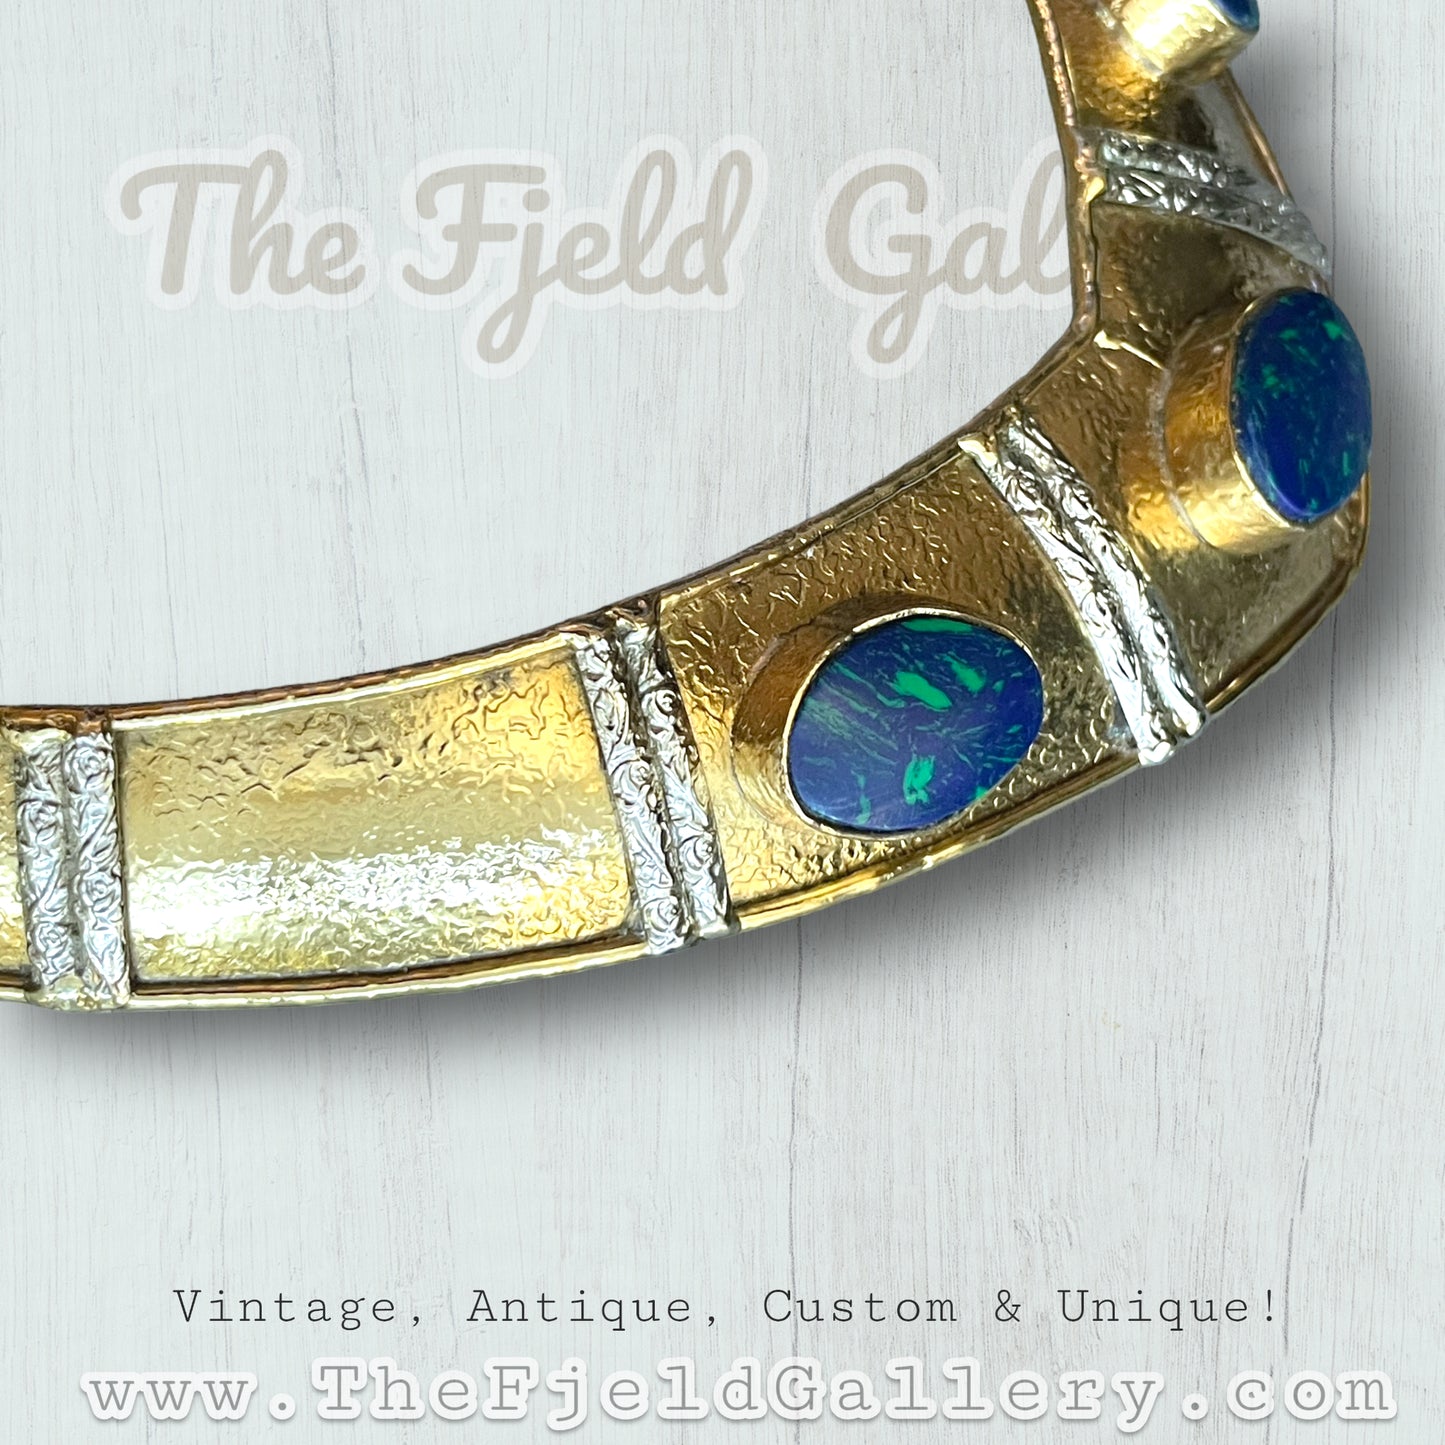 Vintage Brass & Silver Chunky Collar Necklace with Azurite Blue & Green Gemstones